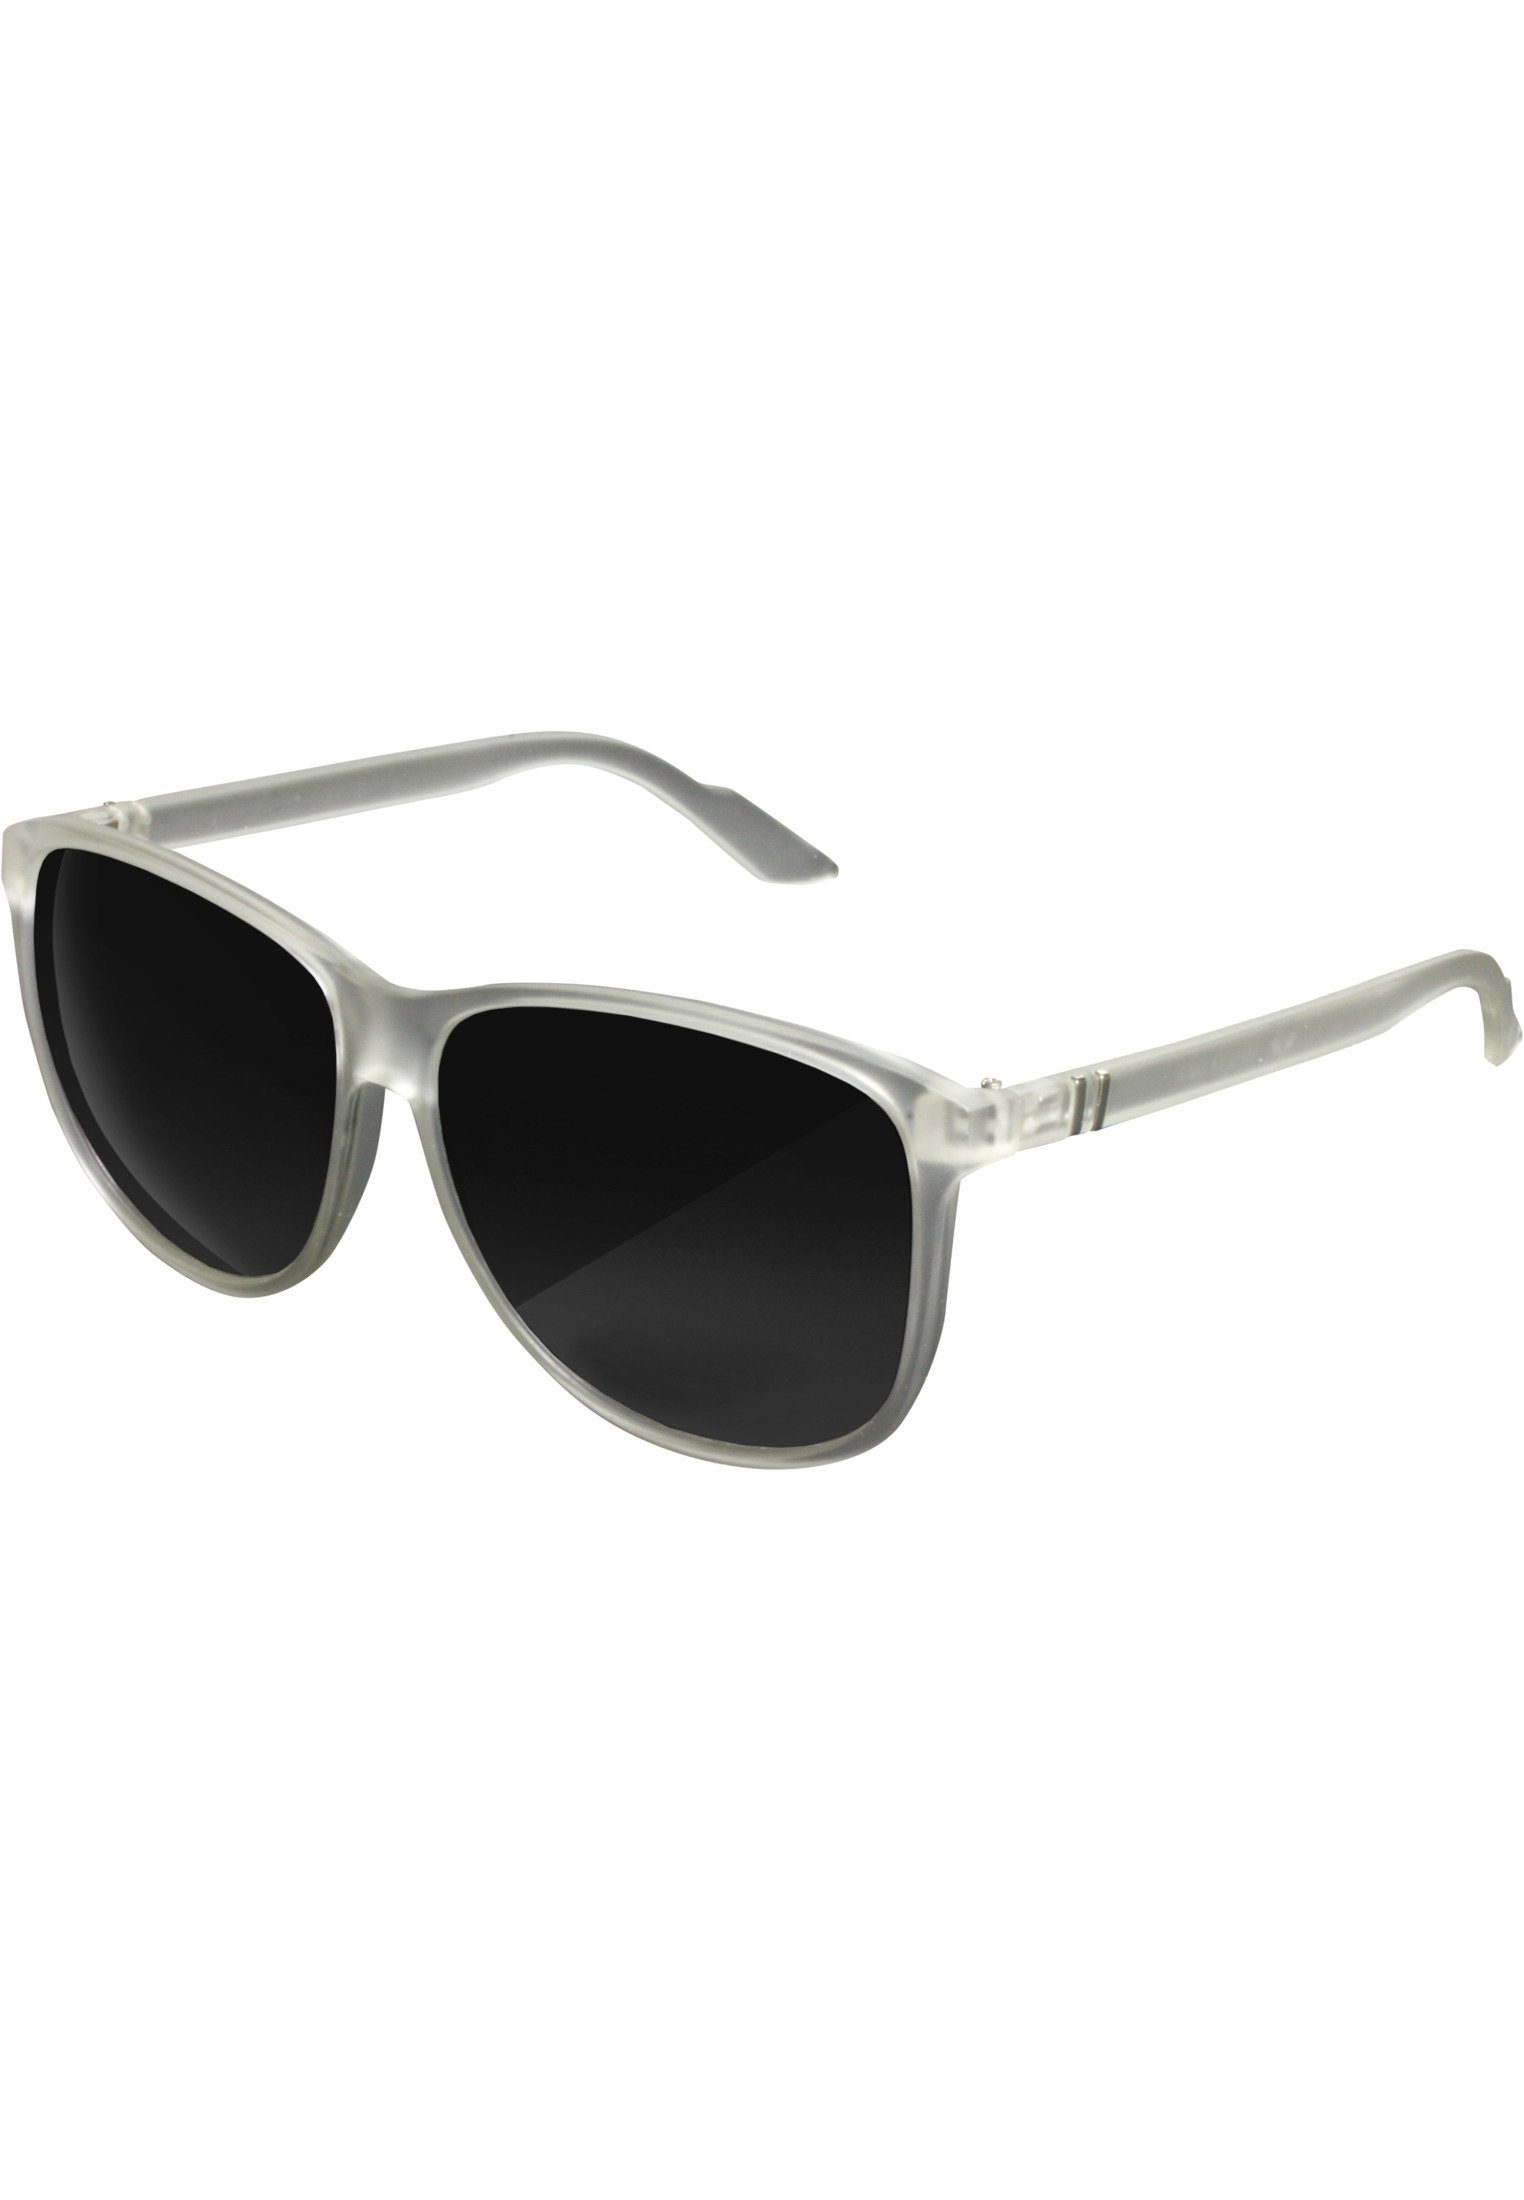 Sonnenbrille Accessoires clear Chirwa Sunglasses MSTRDS